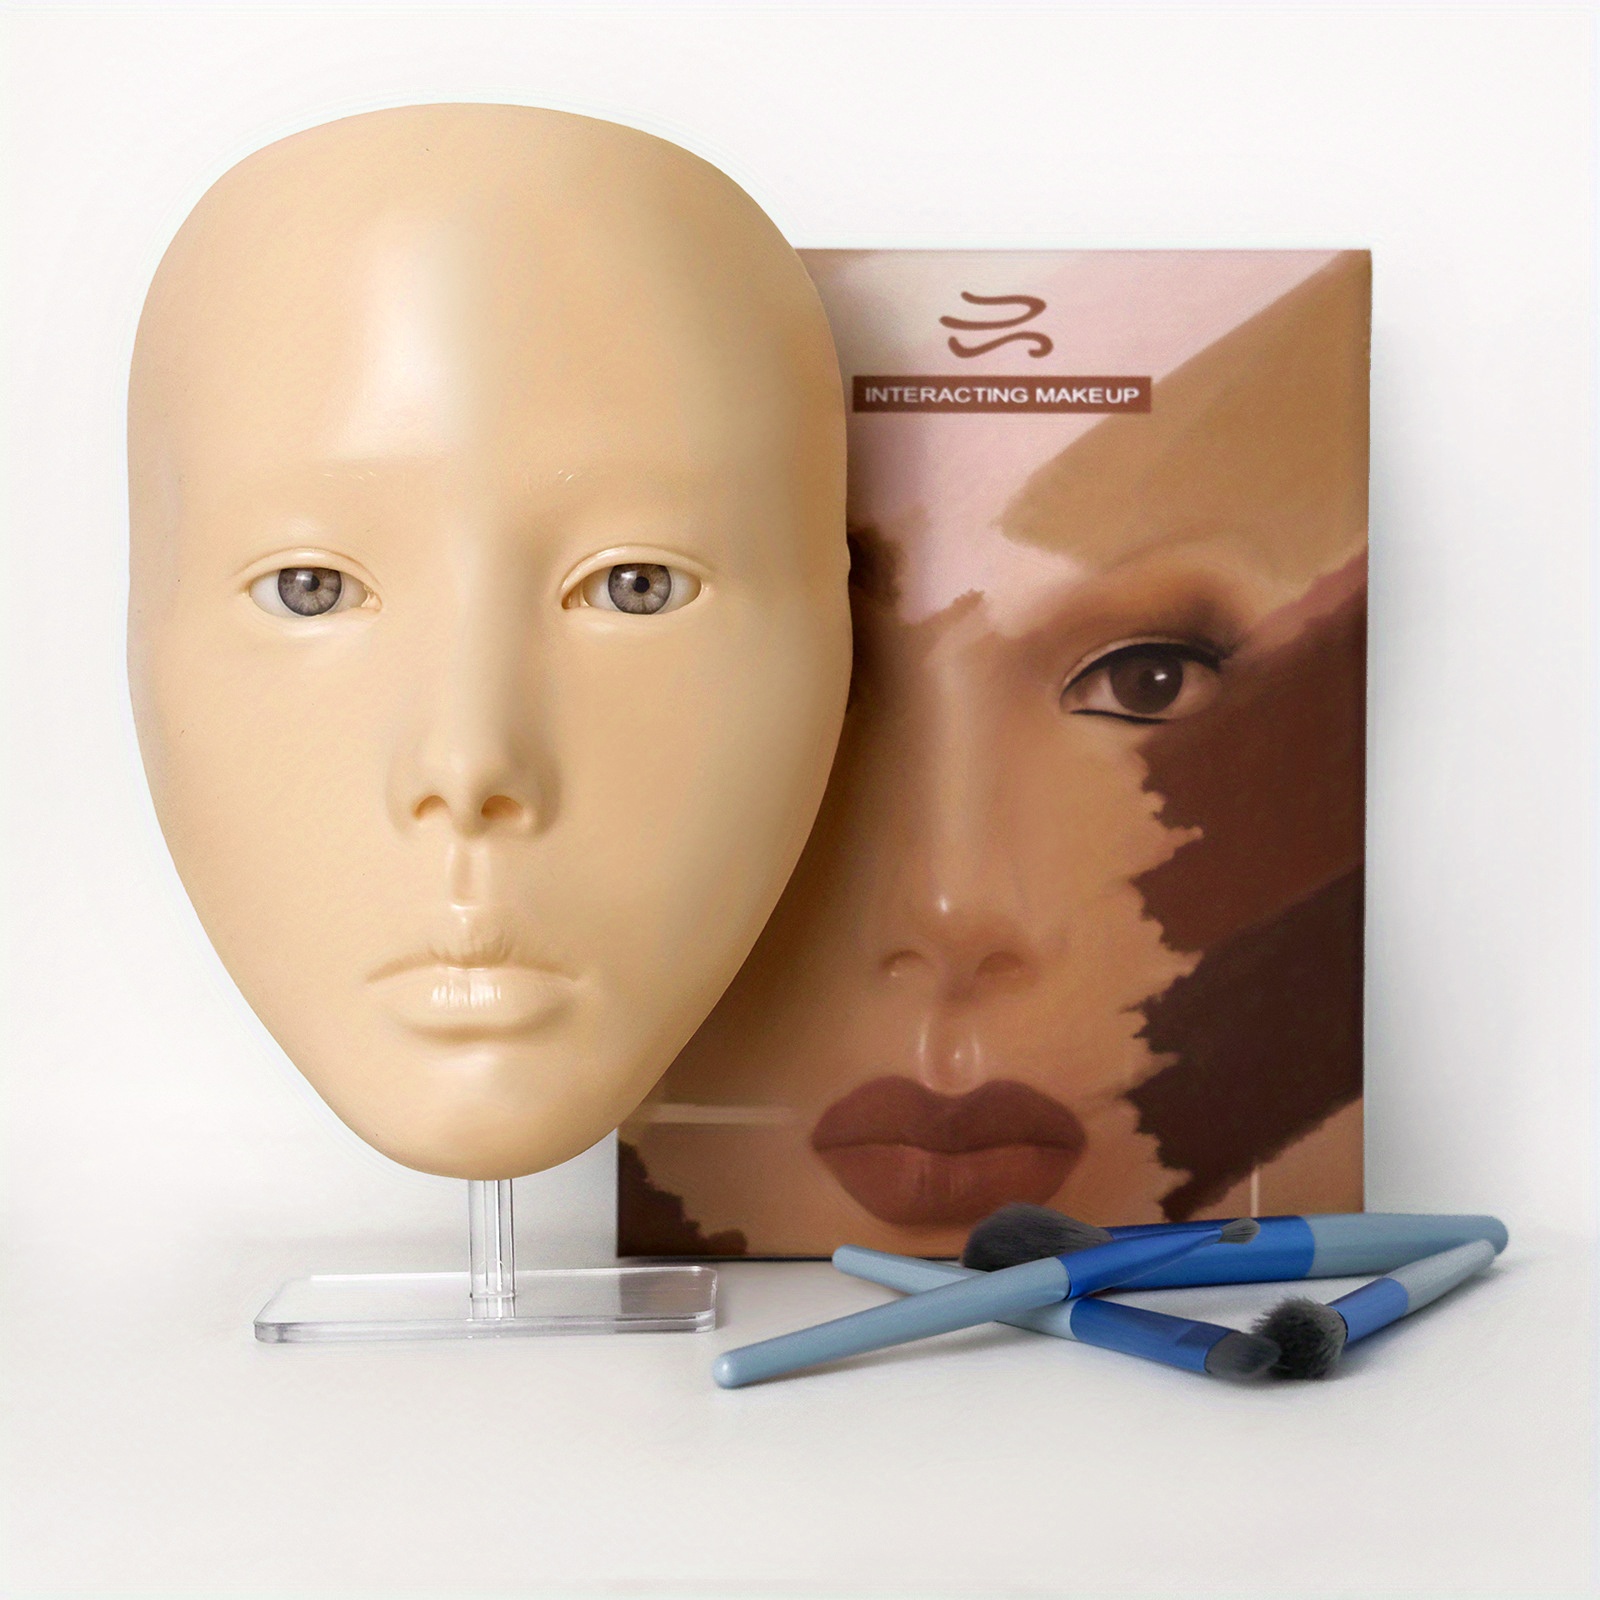 YEEFAIRY 3D Full Silicone Face for Makeup Practice, New Upgrade Female Face  Eye Board to Practice Make up, Reusable Head Mannequin for Imporving